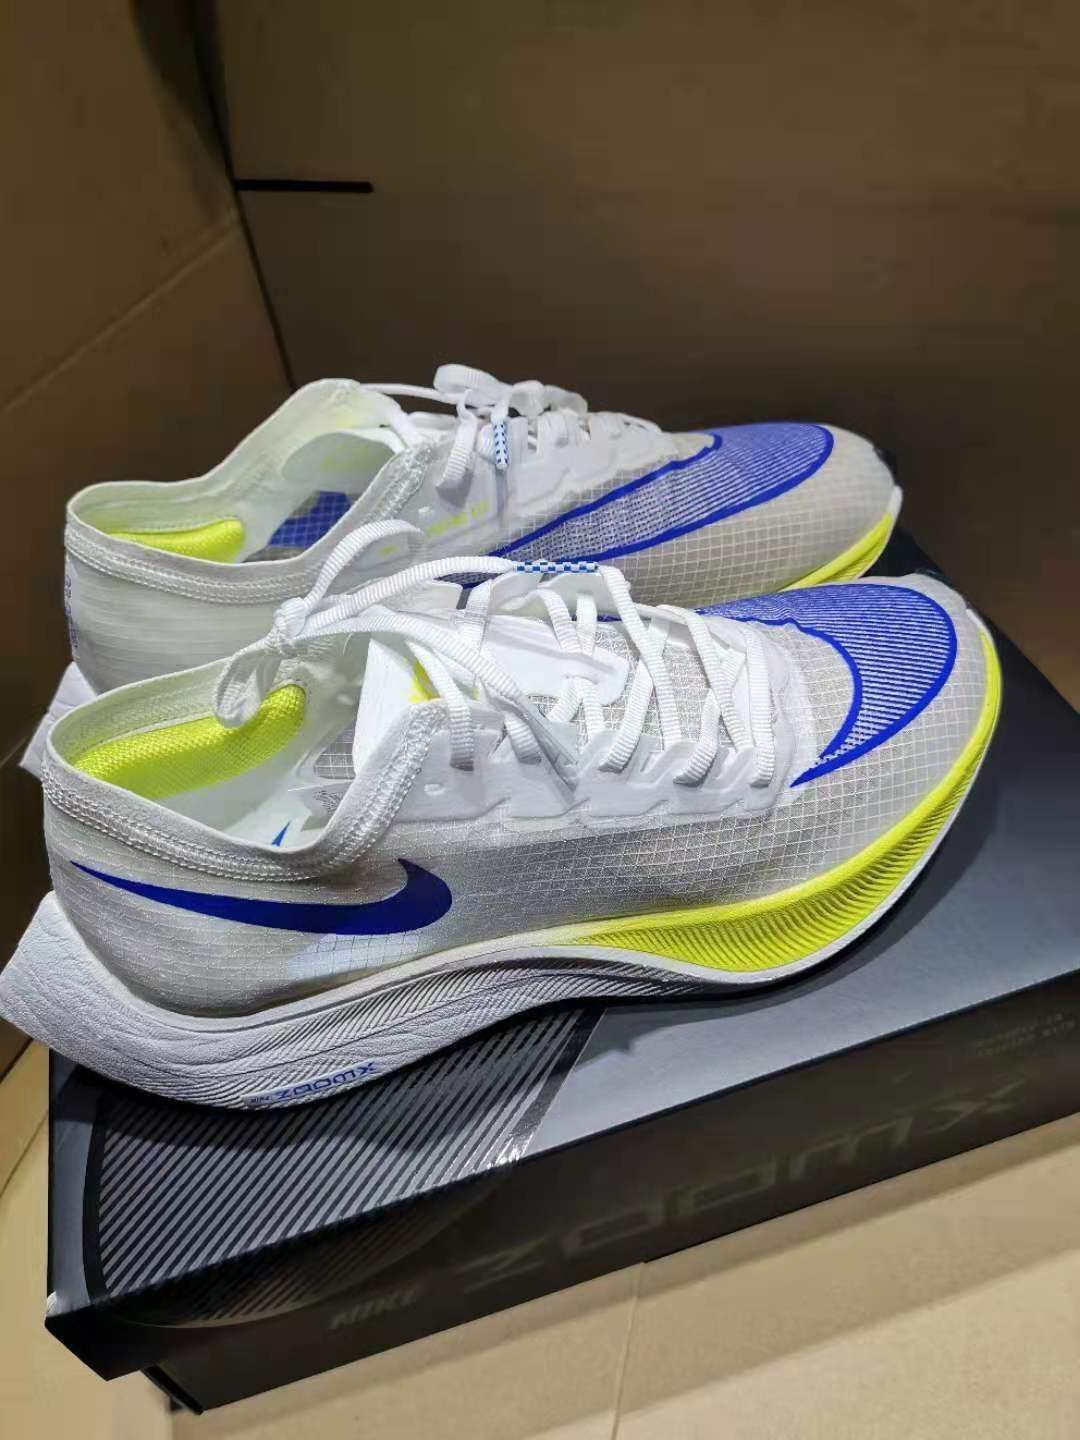 Rainy Implement childhood Buy Usdstore [PRE-ORDER] NIKE ZOOMX VAPORFLY NEXT% EKIDEN PACK SPECIAL  EDITION AO4568-103 | eRomman